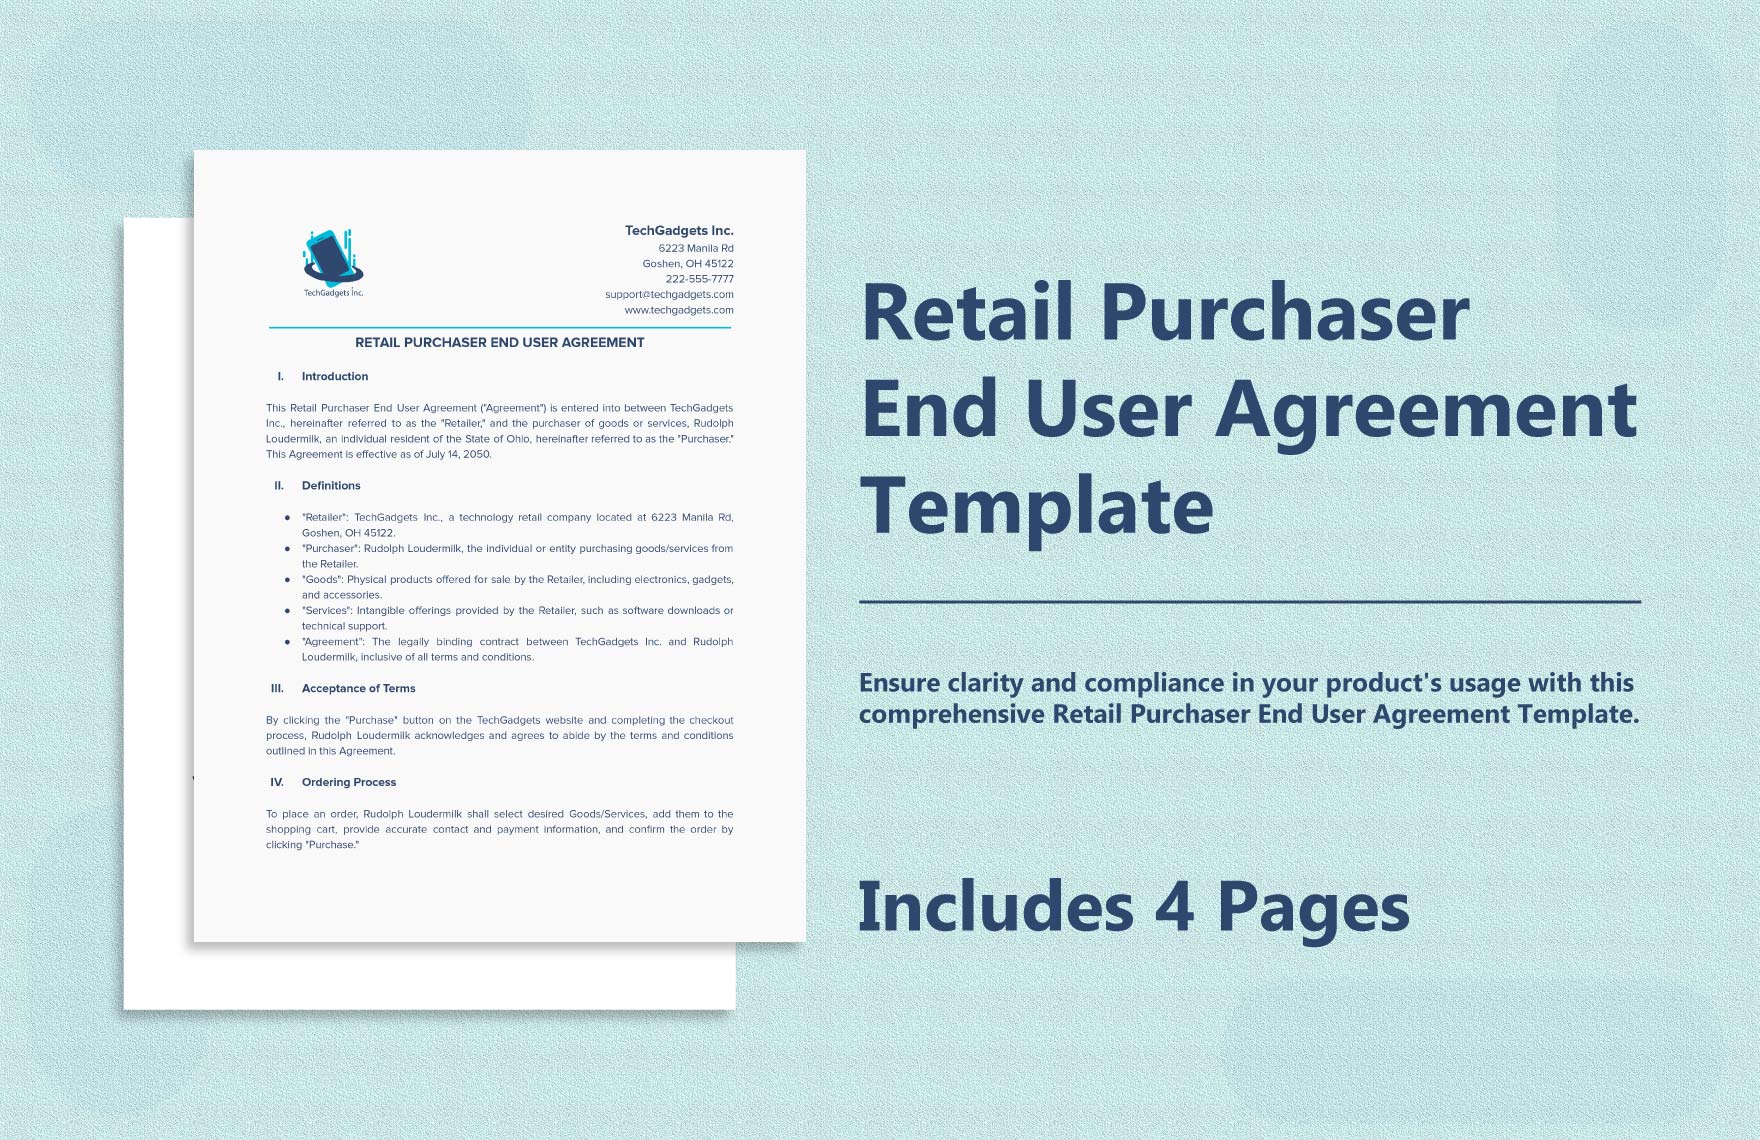   Retail Purchaser End User Agreement Template